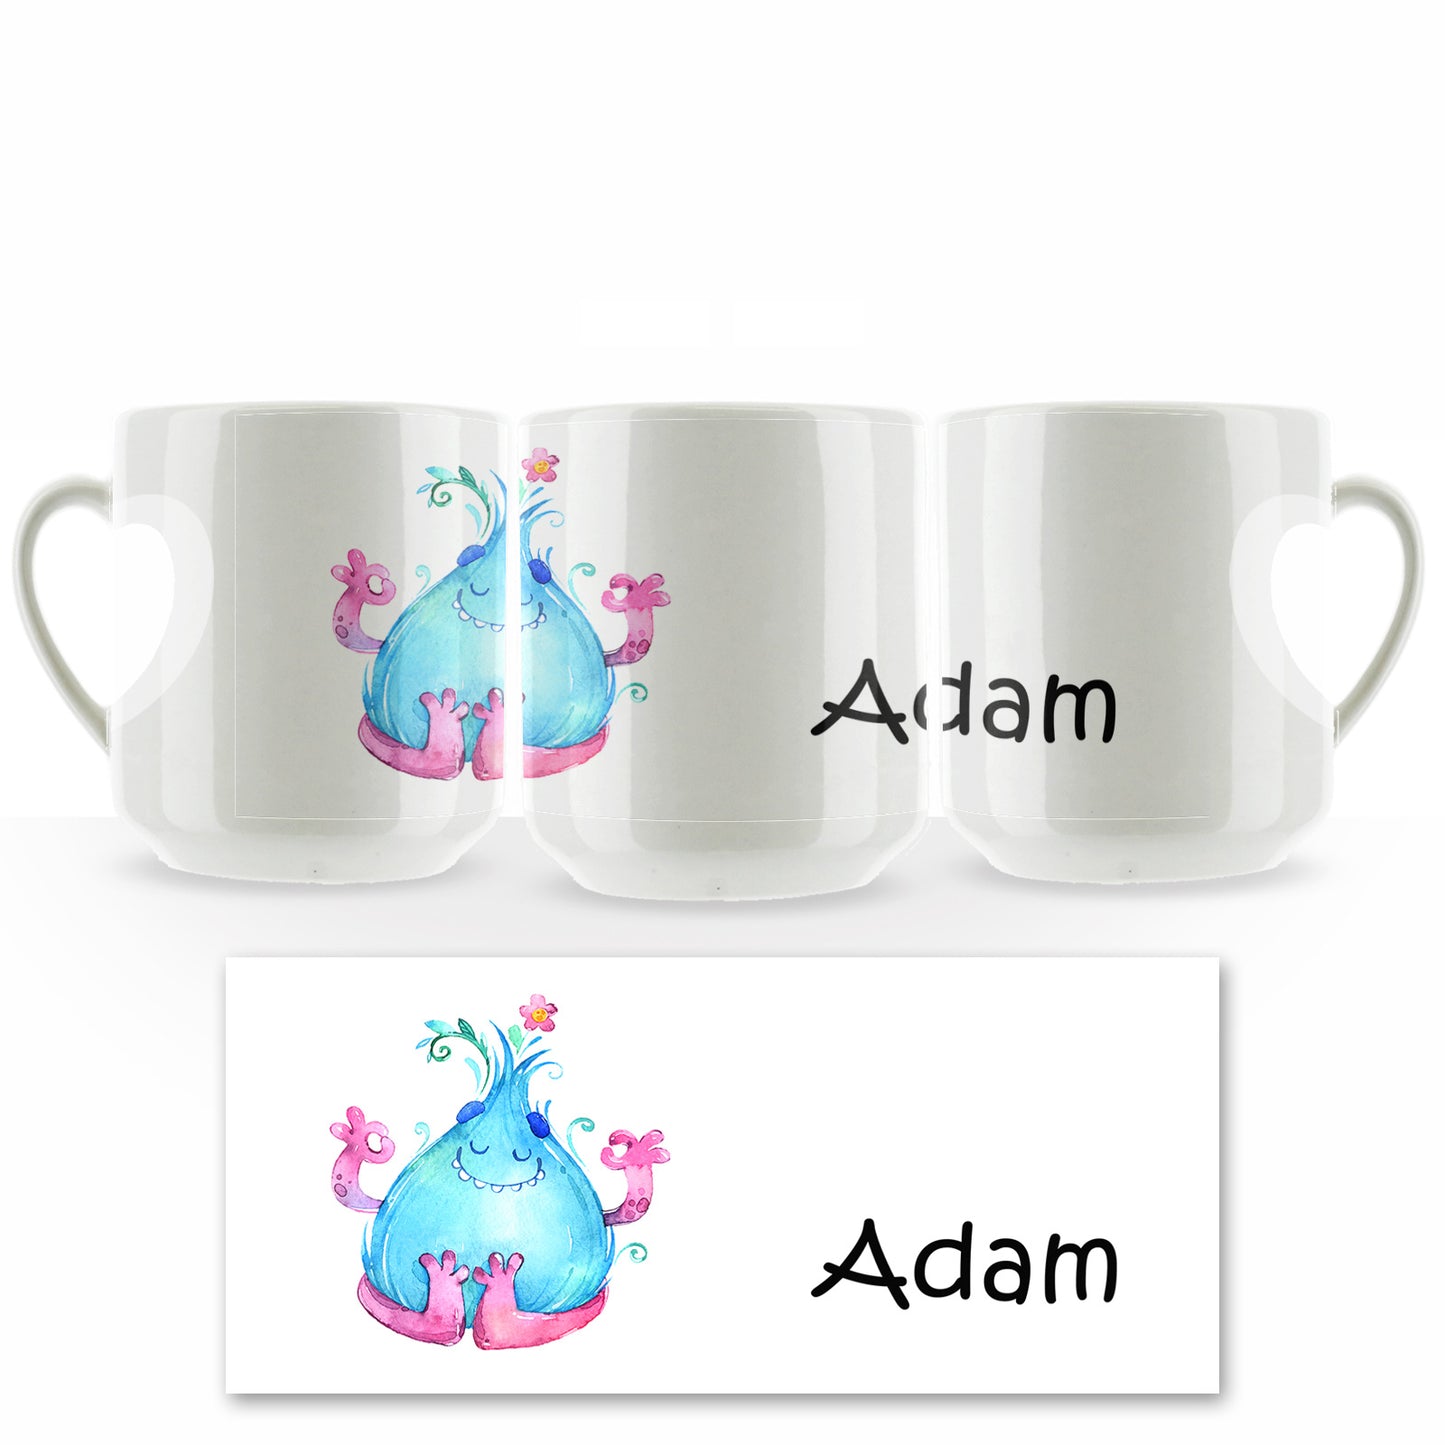 Personalised Mug with Childish Text and Blue Flame Monster